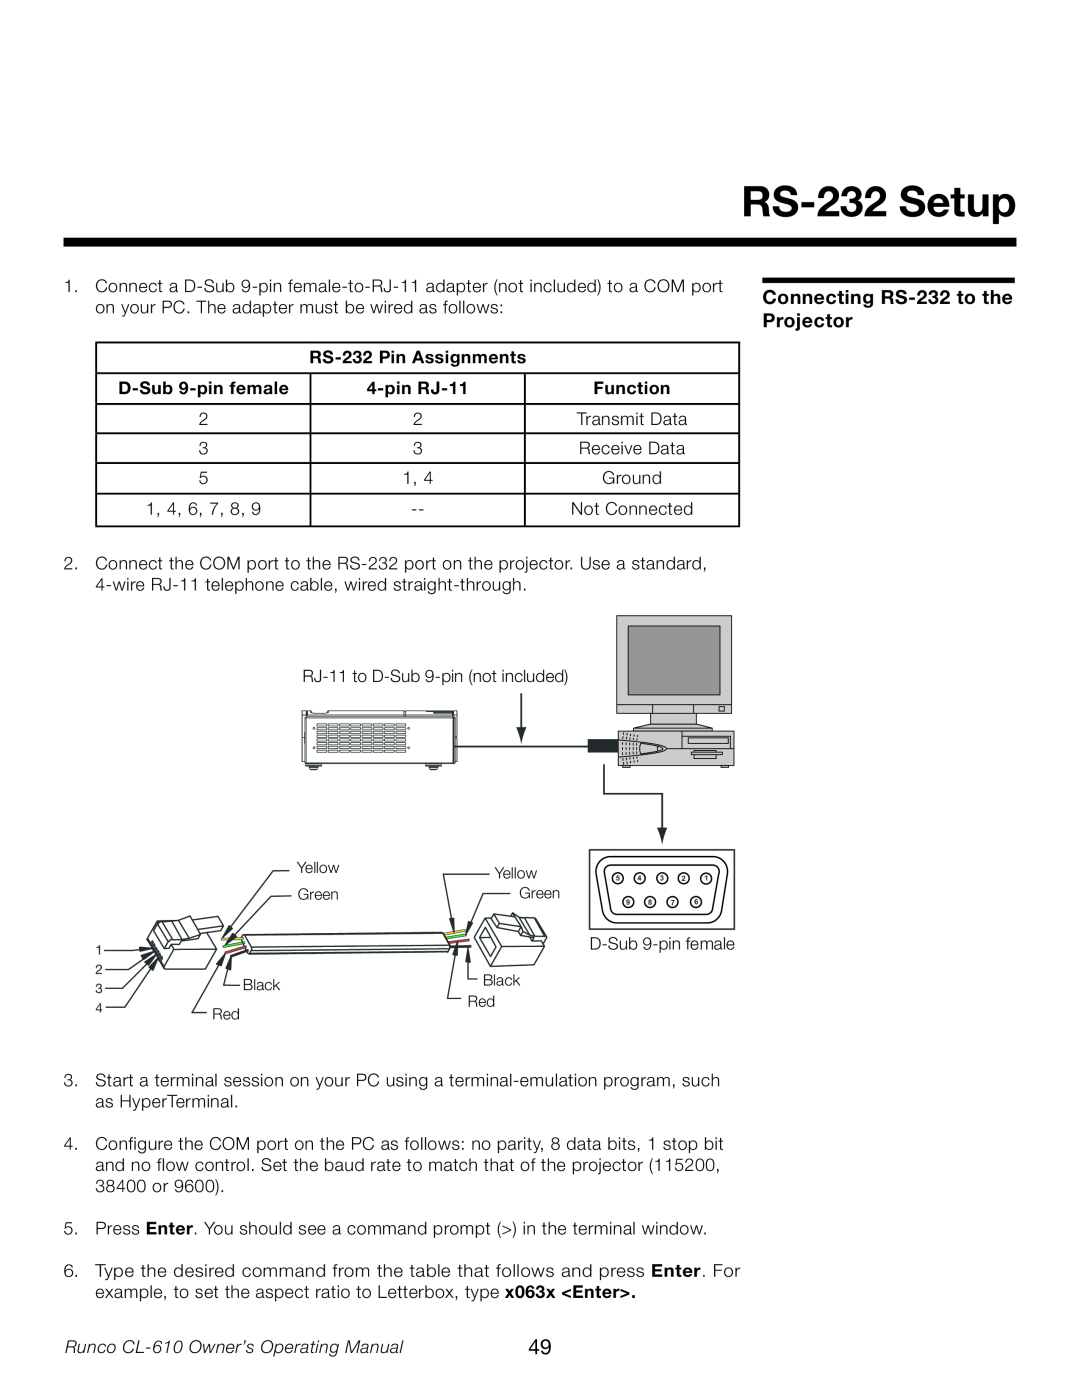 Runco CL-610LT RS-232 Setup, Connecting RS-232 to the Projector, RS-232 Pin Assignments, D-Sub 9-pin female, pin RJ-11 